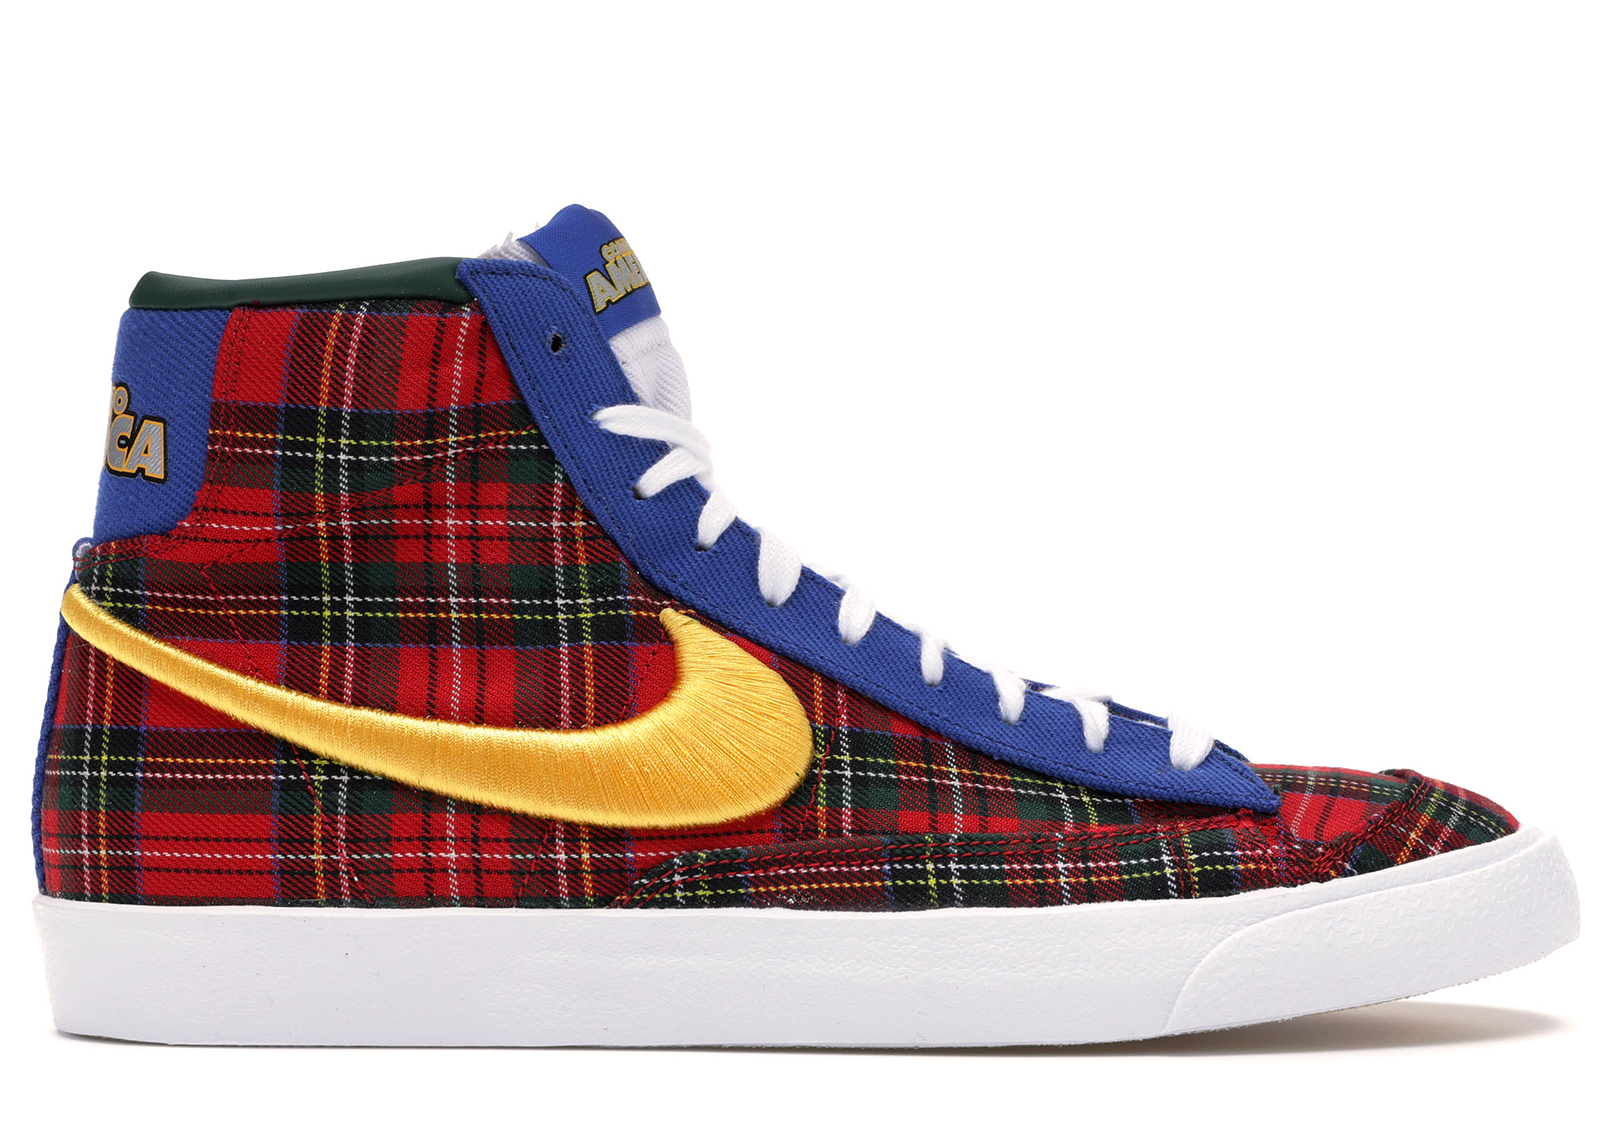 coming to america blazer shoes